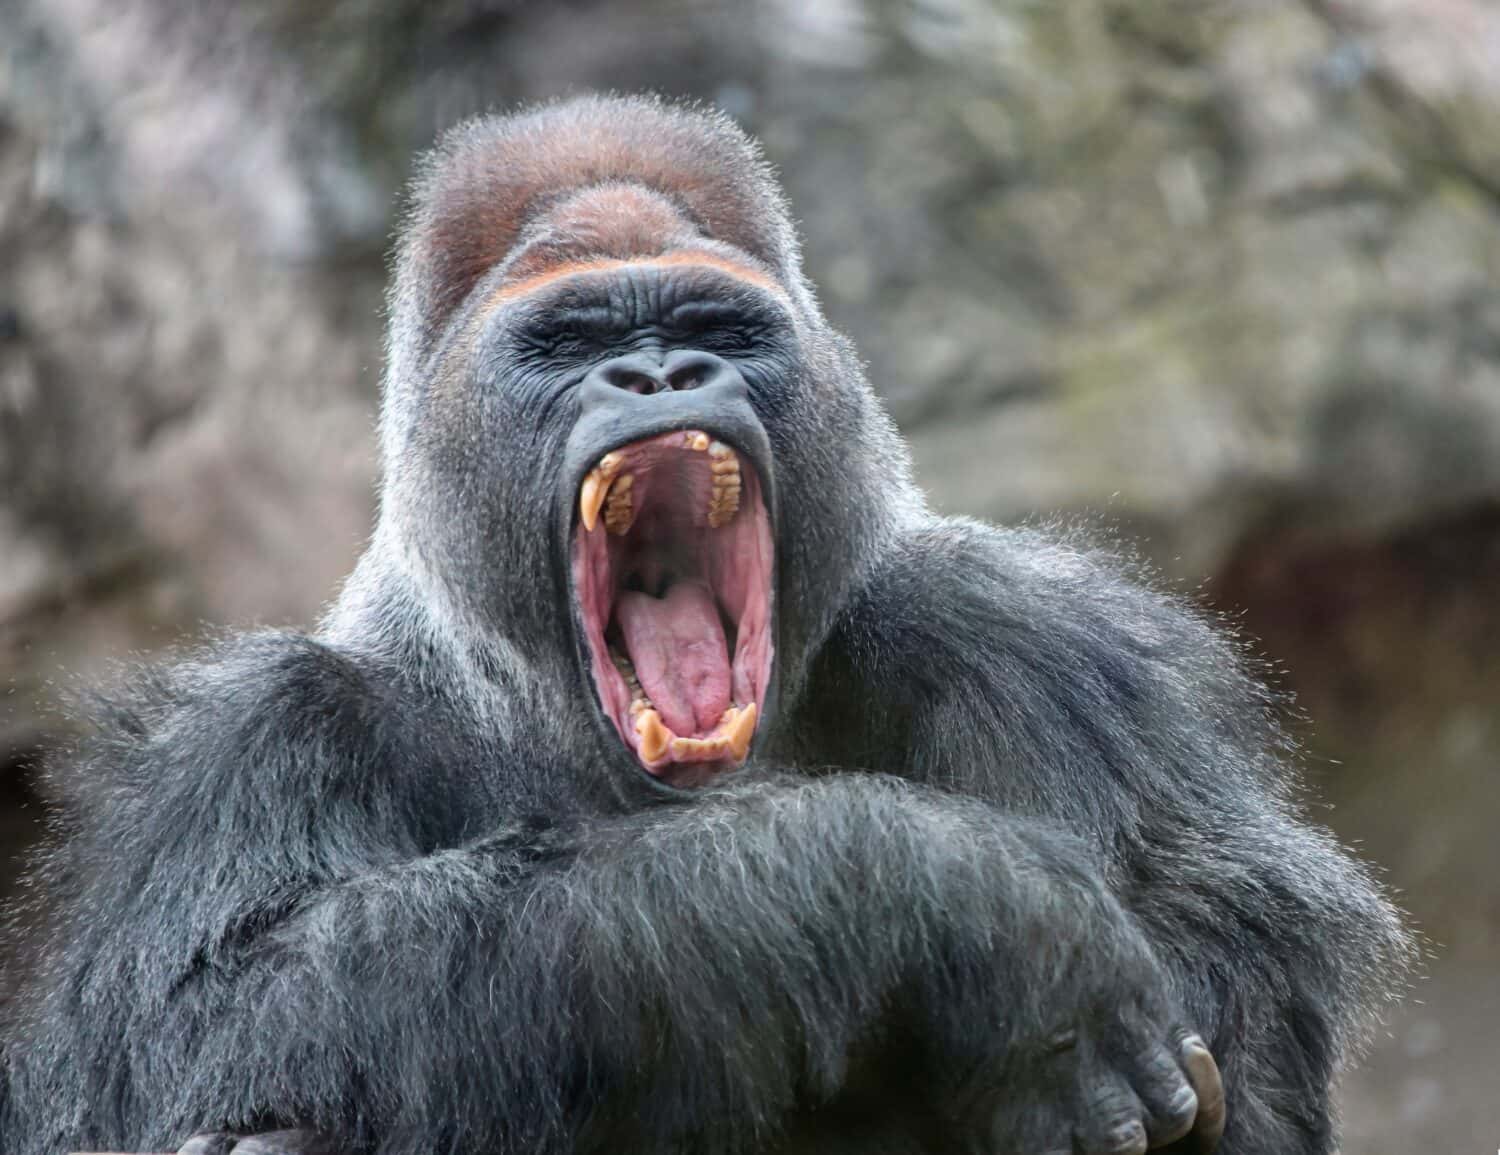 Adult alpha male gorilla yawns irritably, showing dangerous fangs and teeth. Dominant male gorilla yawns with his mouth open.